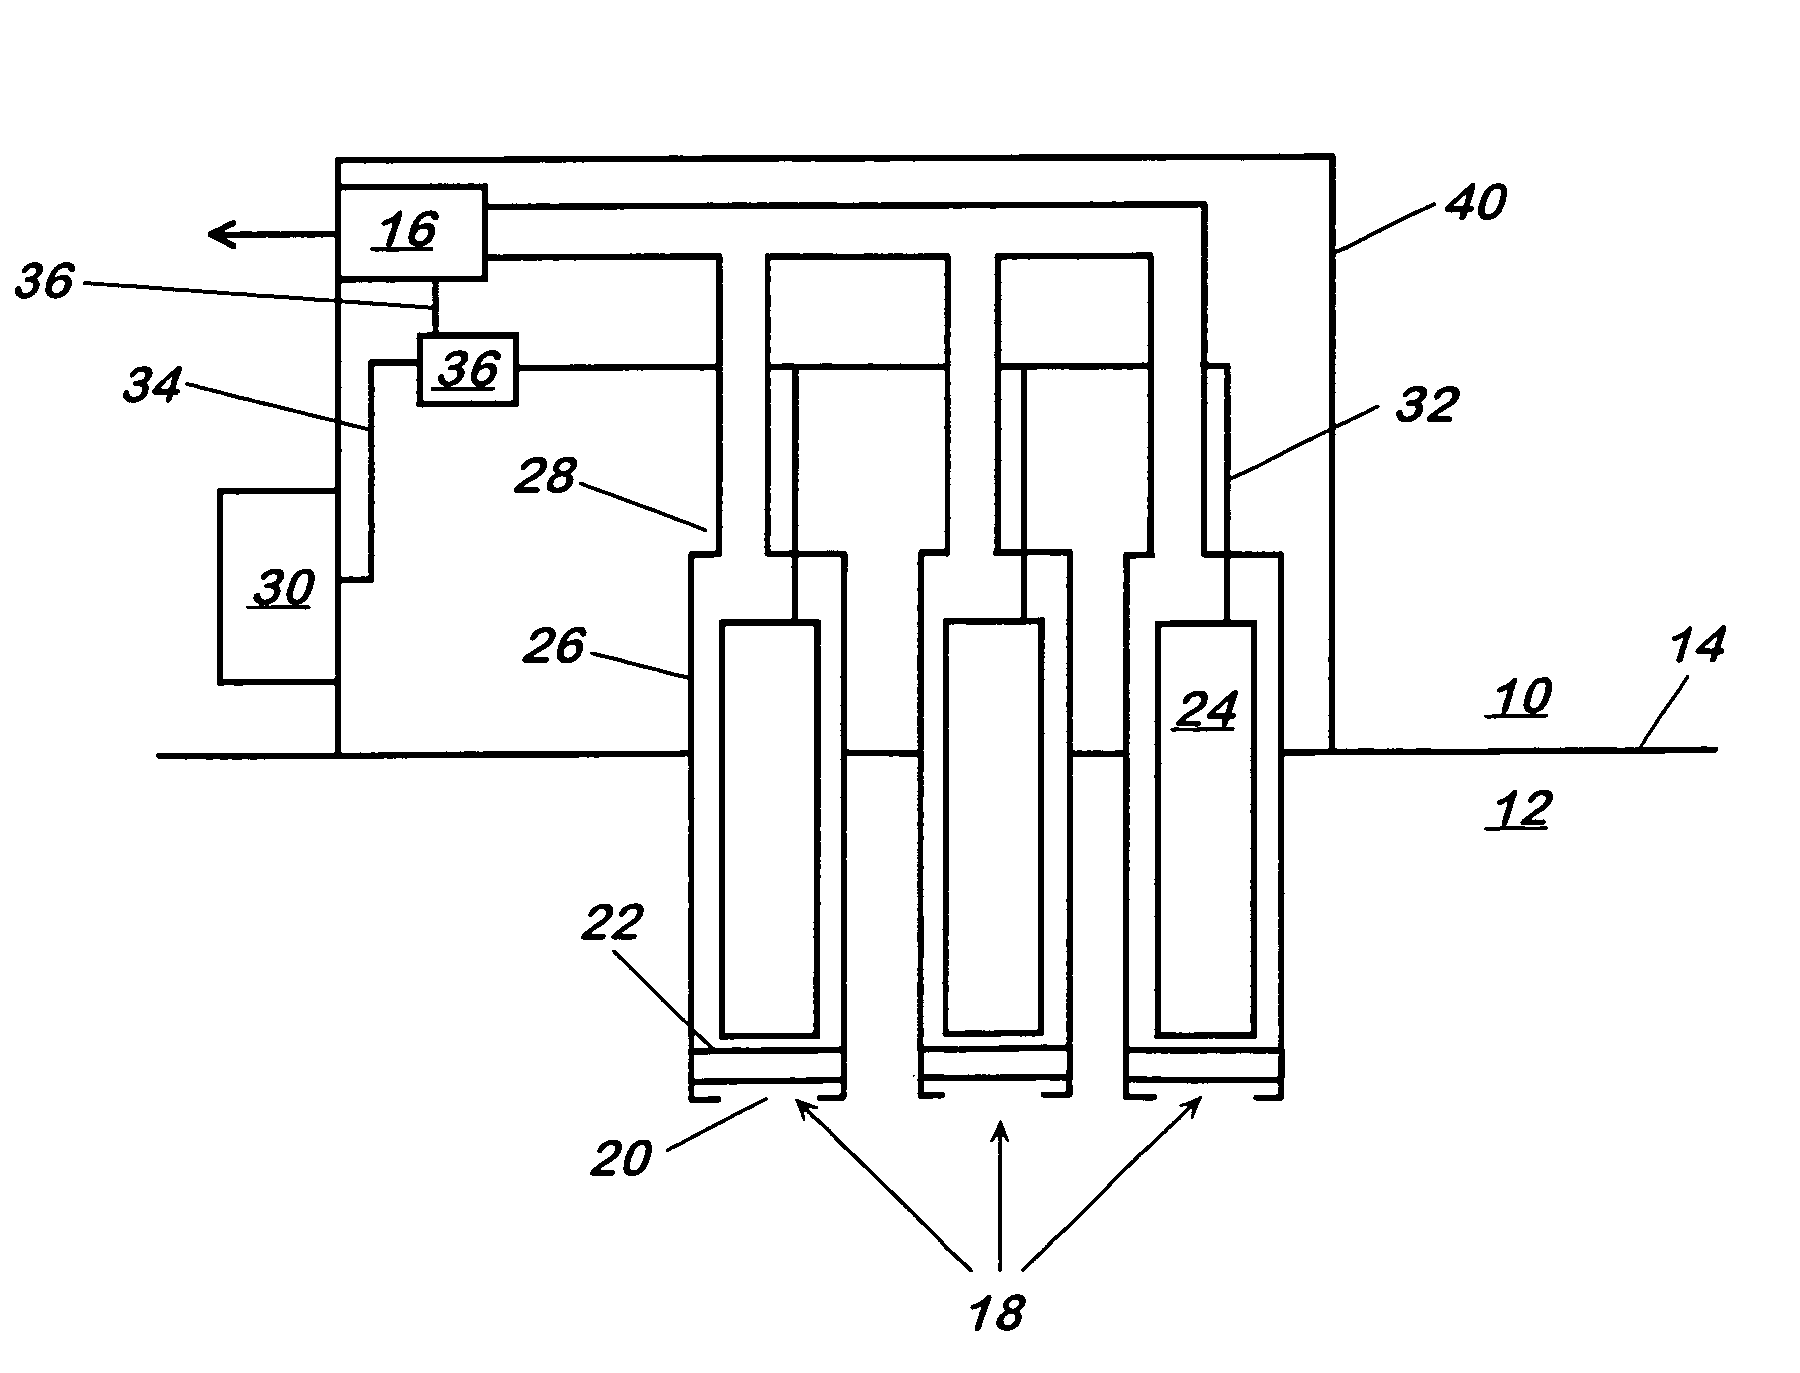 Method and apparatus for generating power from voltage gradients at sediment-water interfaces using active transport of sediment porewater